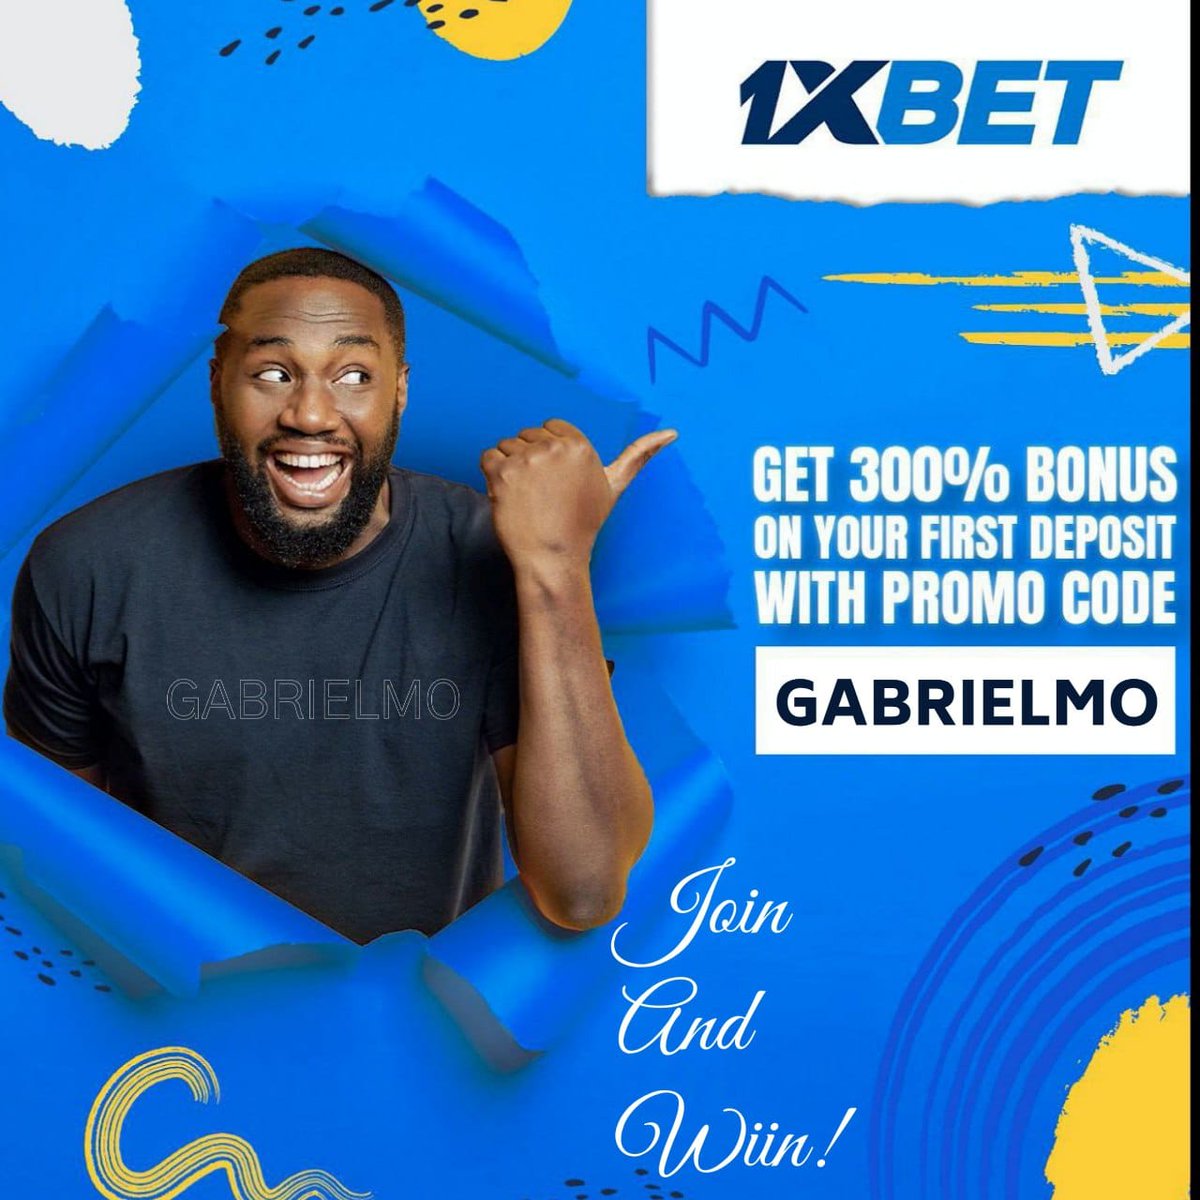 When you bet with #1xbet, here are some of the advantages you'll definitely enjoy - Claim 100% of your total winnings - fast withdrawals - High odds - Wide market of games - A 300% Bonus on your first deposit Register today via tapxlink.com/GABRIELMO_link Promocode: GABRIELMO